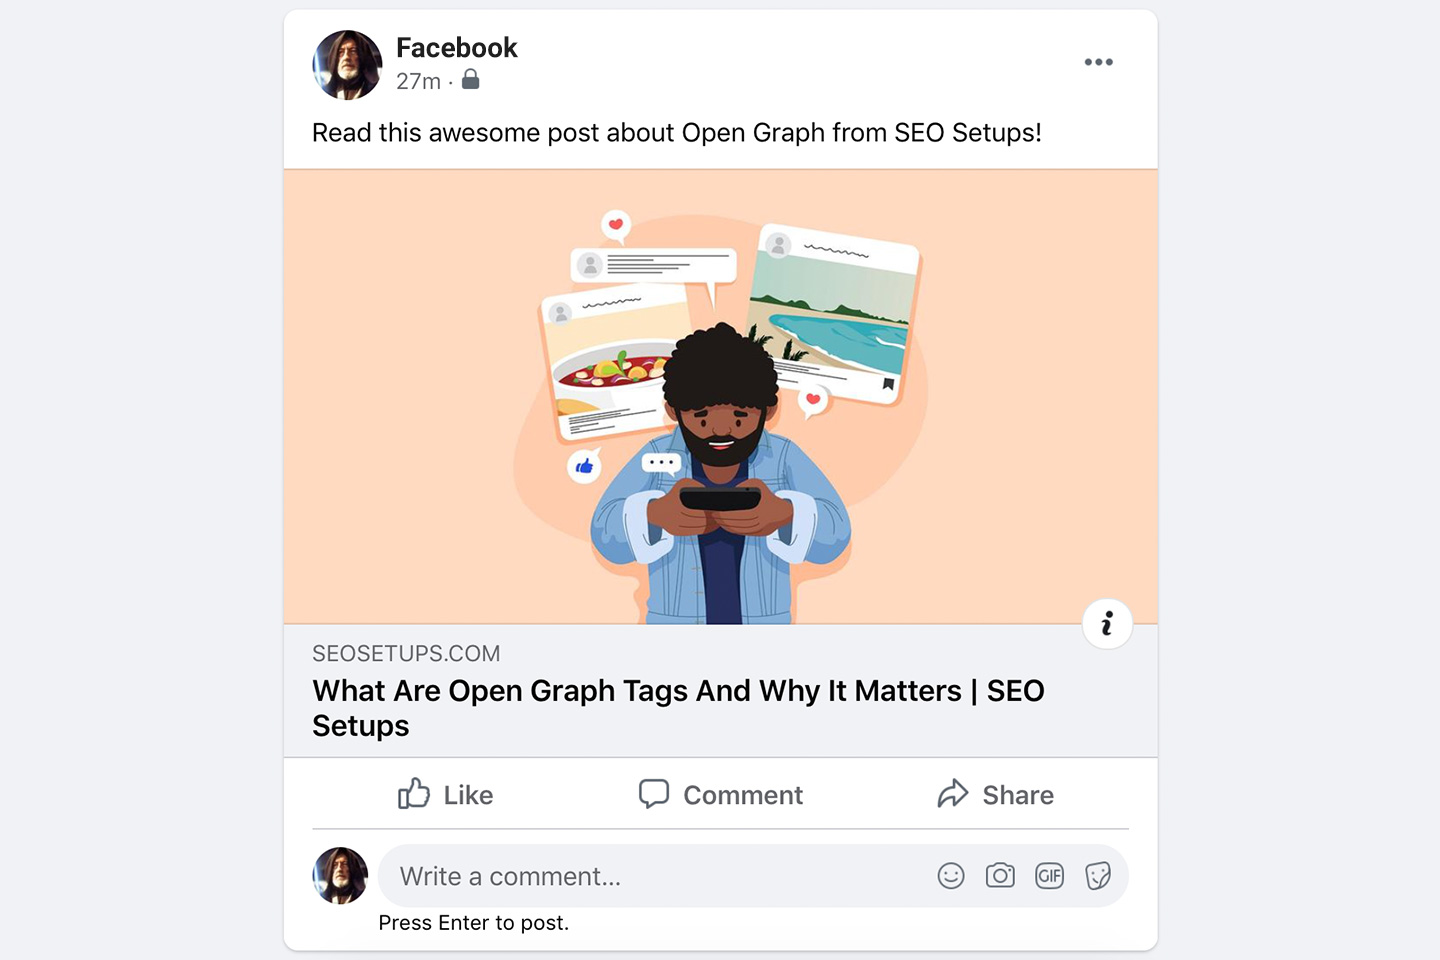 Facebook Rich Object using Open Graph tags